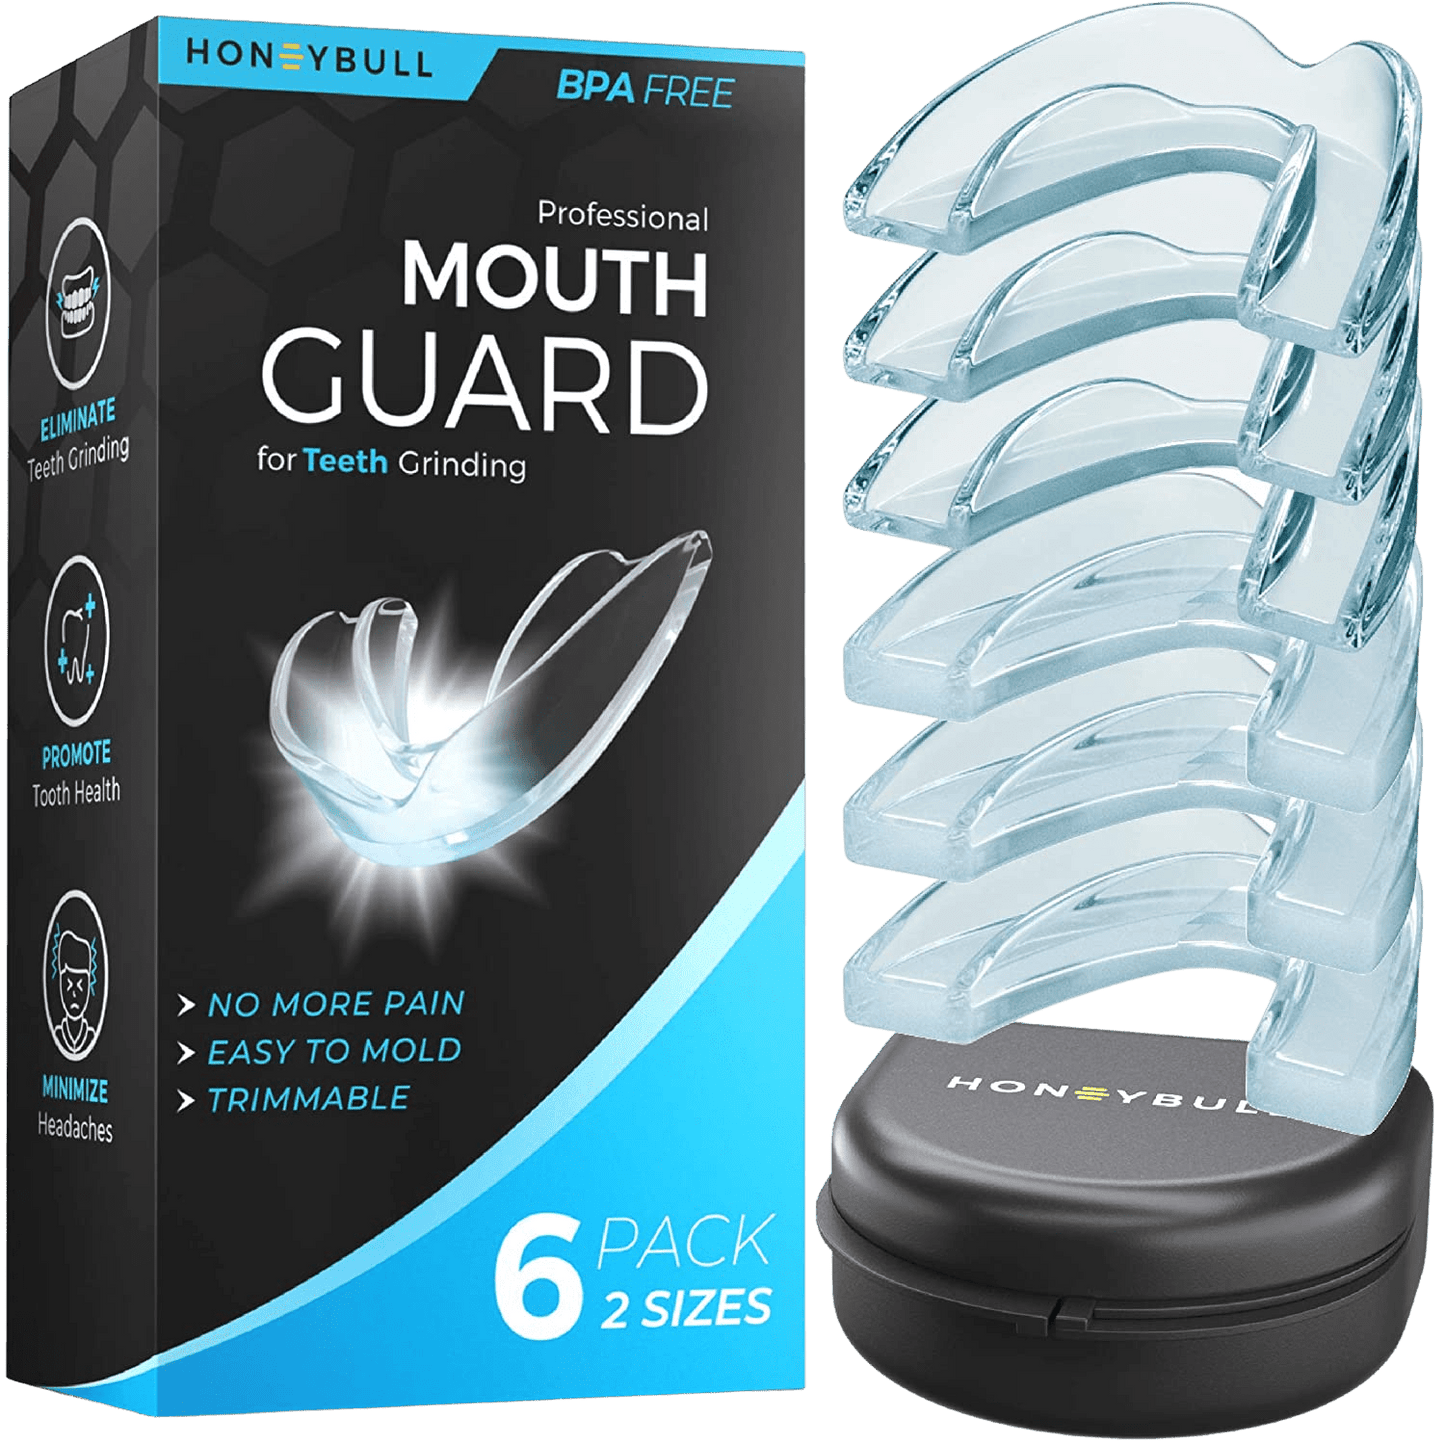 HONEYBULL Mouth Guard for Grinding Teeth [6 Pack] Comes in 2 Sizes for Light and Heavy Grinding | Comfortable Custom Mold for Clenching at Night, Bruxism, Whitening Tray &amp; Guard | Decor Gifts and More